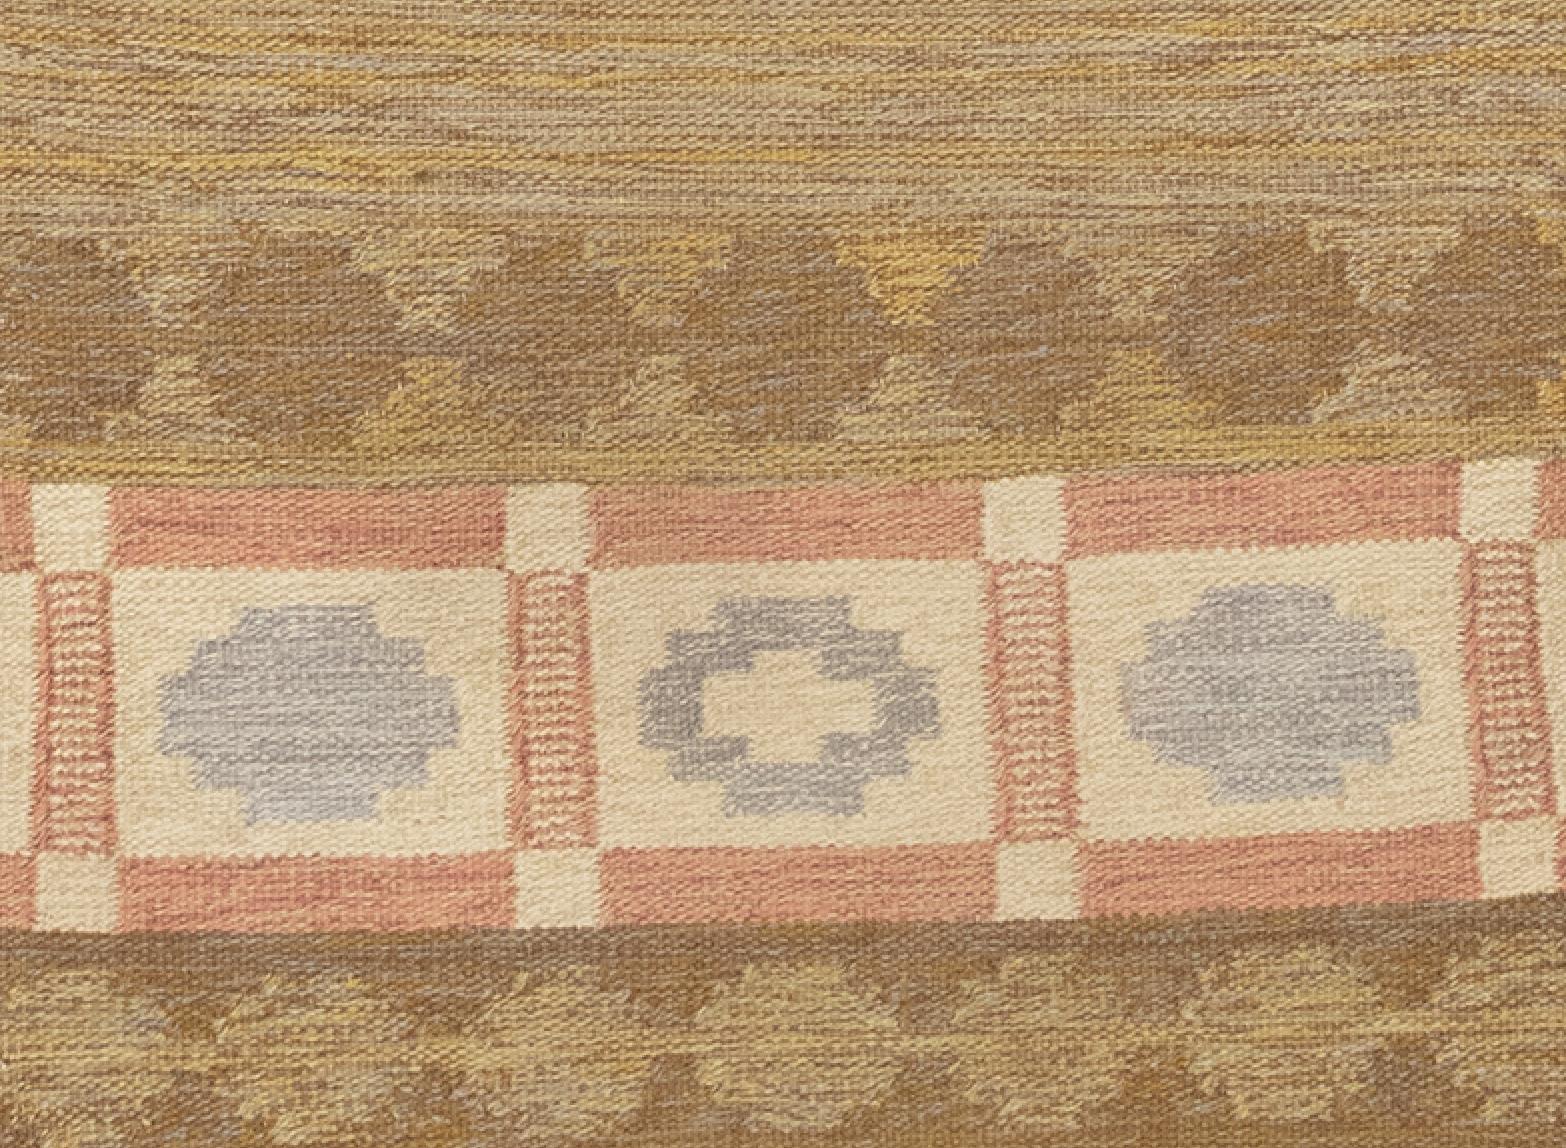 This is Scandinavian flat woven runner from circa 1950. It features a charming color palette based on pastel tones of soft colors. In the ground, the combination of brown, blue, yellow, and ivory creates a fascinating warm and cool marl effect.